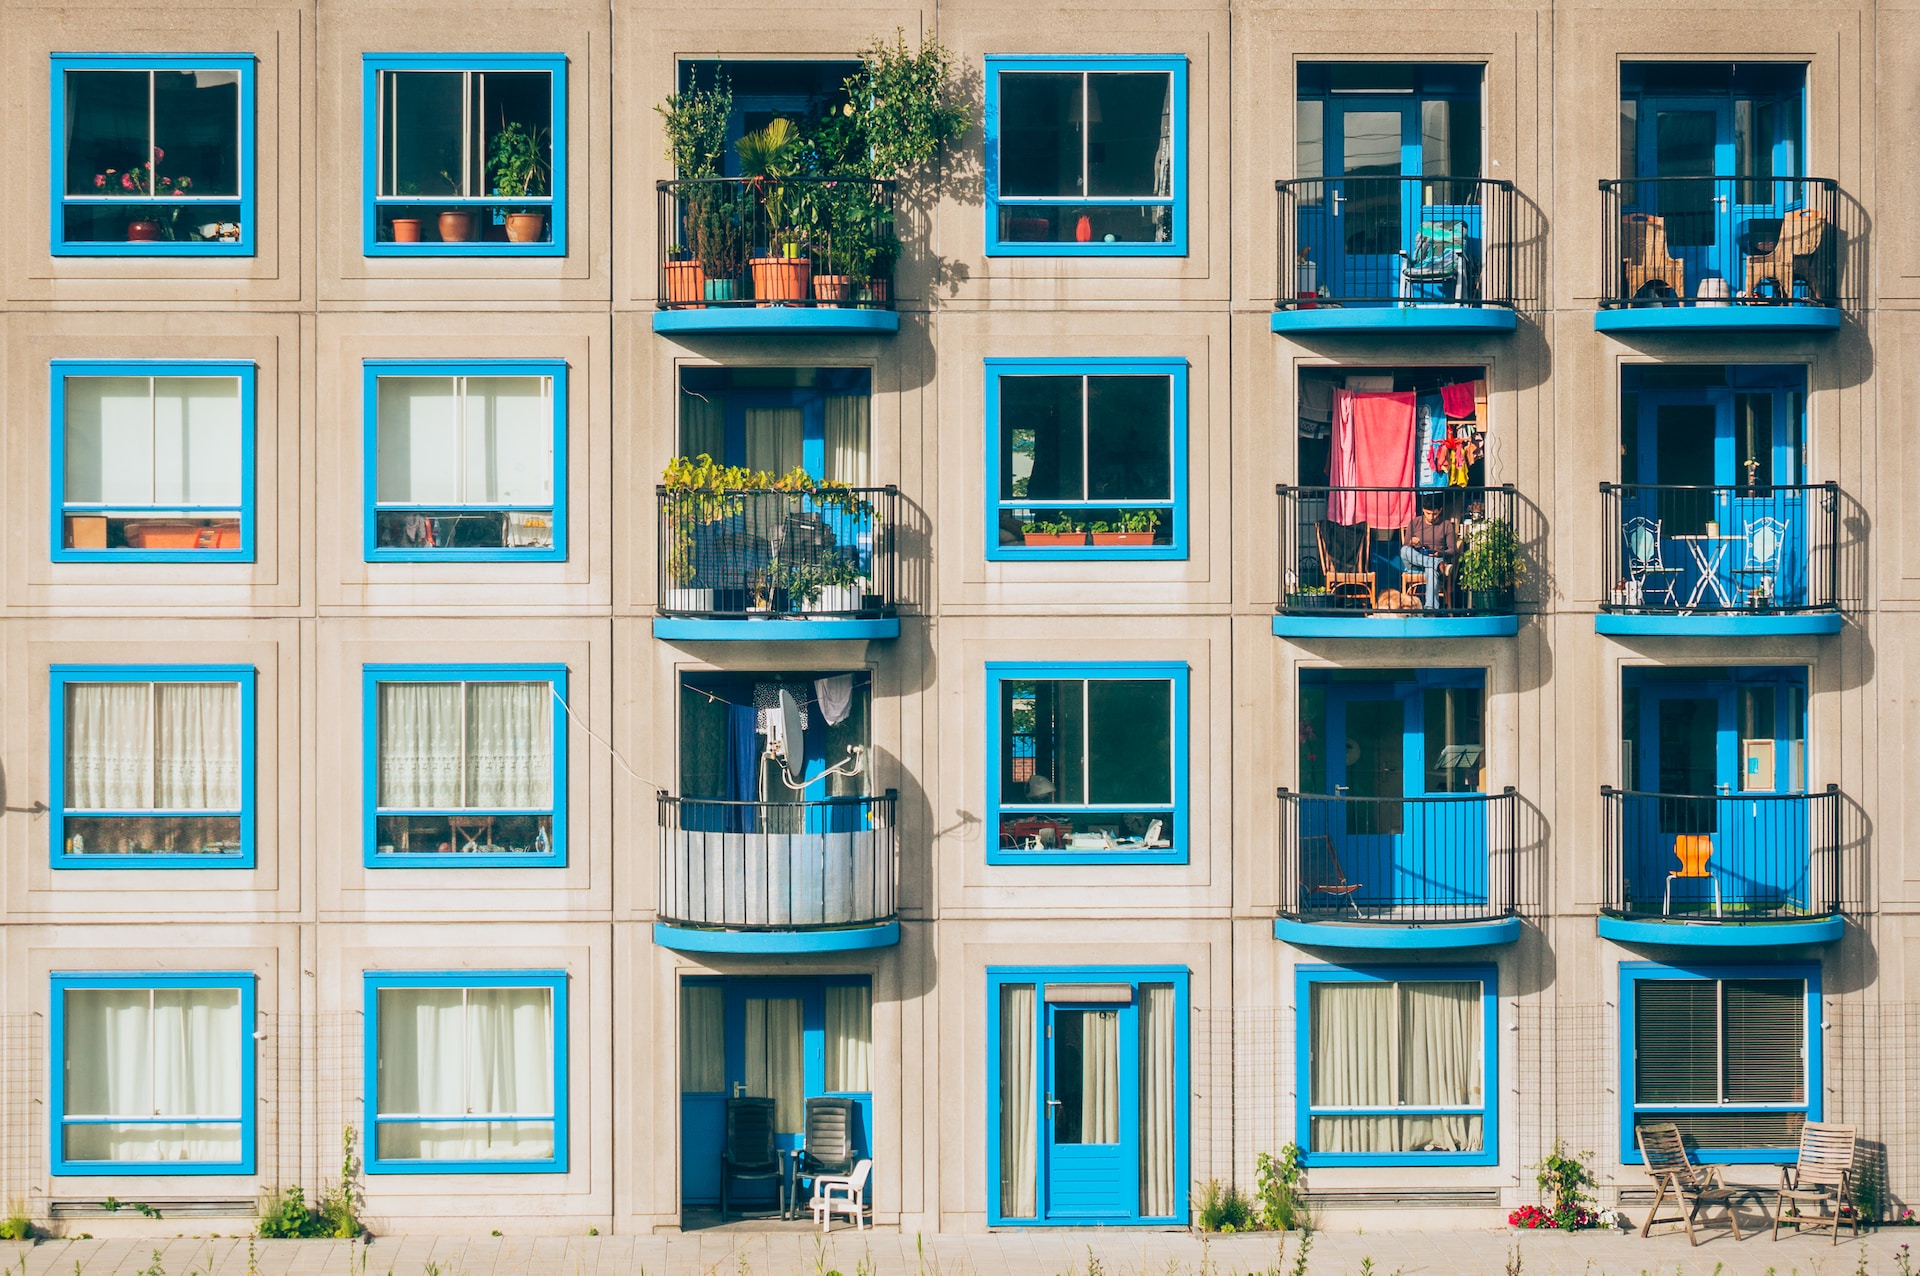 Façade of an apartment building in Amsterdam, with doors and window frames painted in sky blue